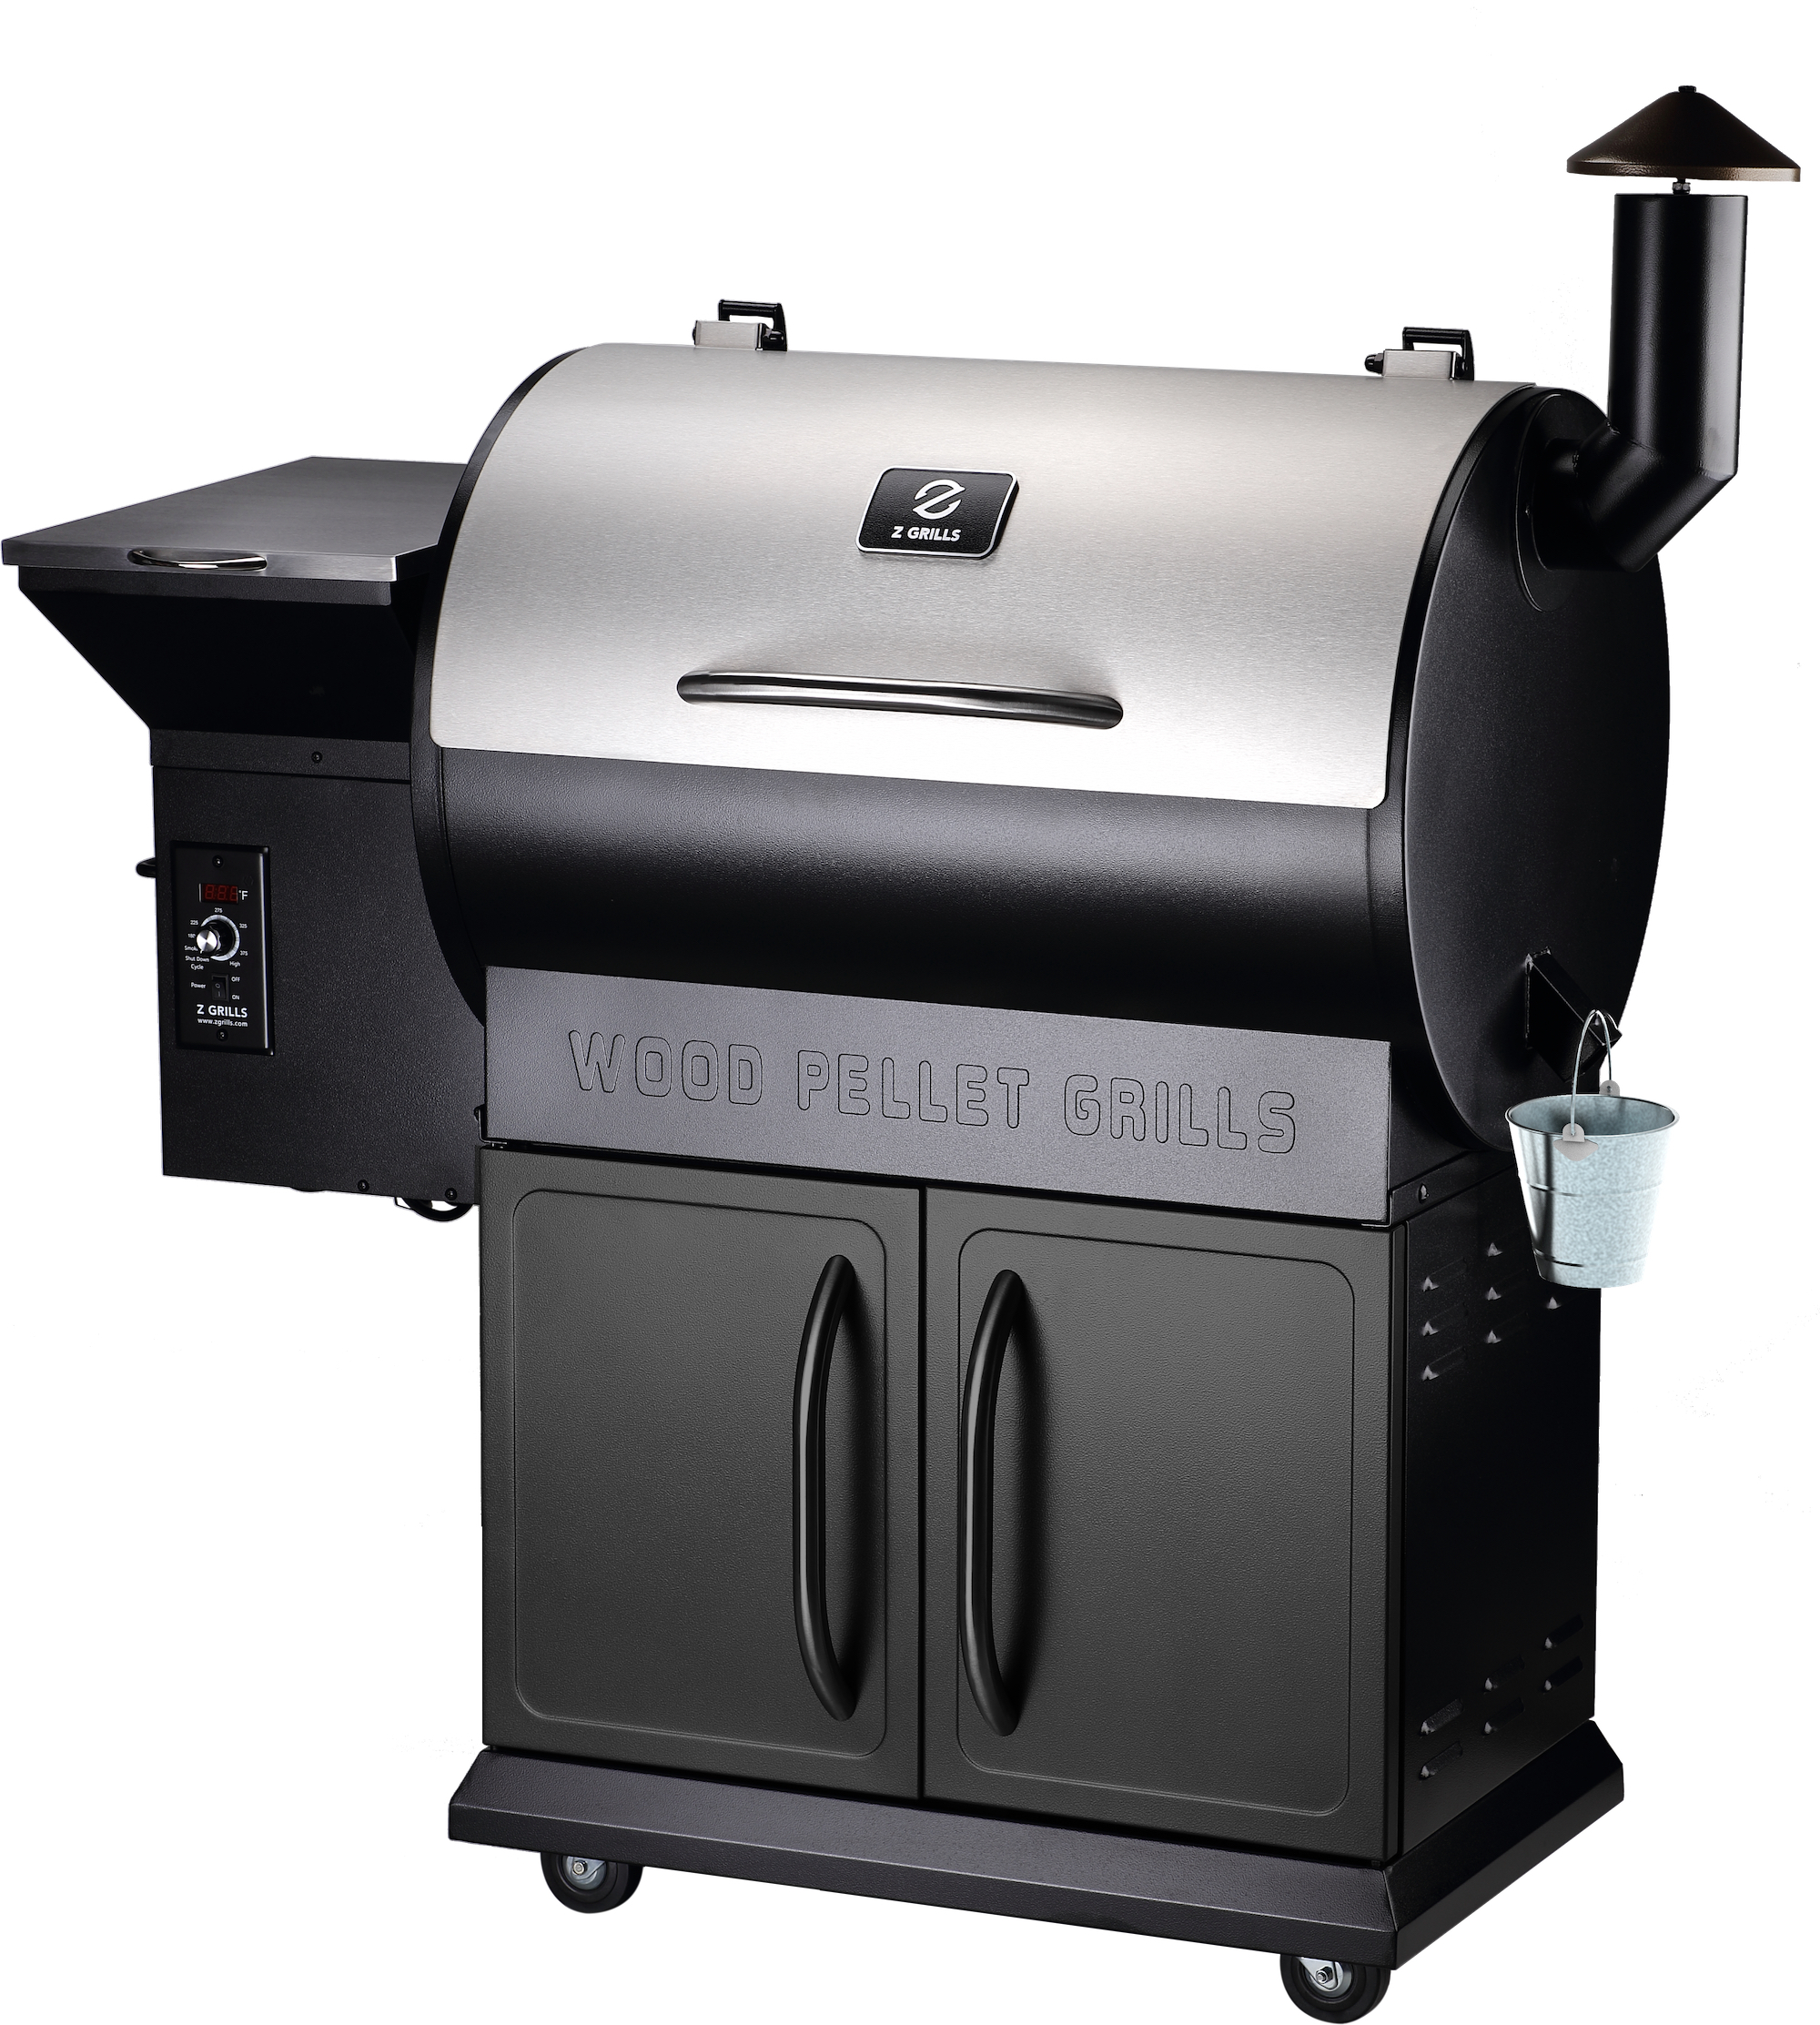 Z Grills ZPG-700E Wood Pellet Grill & Smoker 700 sq in 8 in 1 BBQ Auto Temperature 2020 Model Cover included in Stainless - image 1 of 10